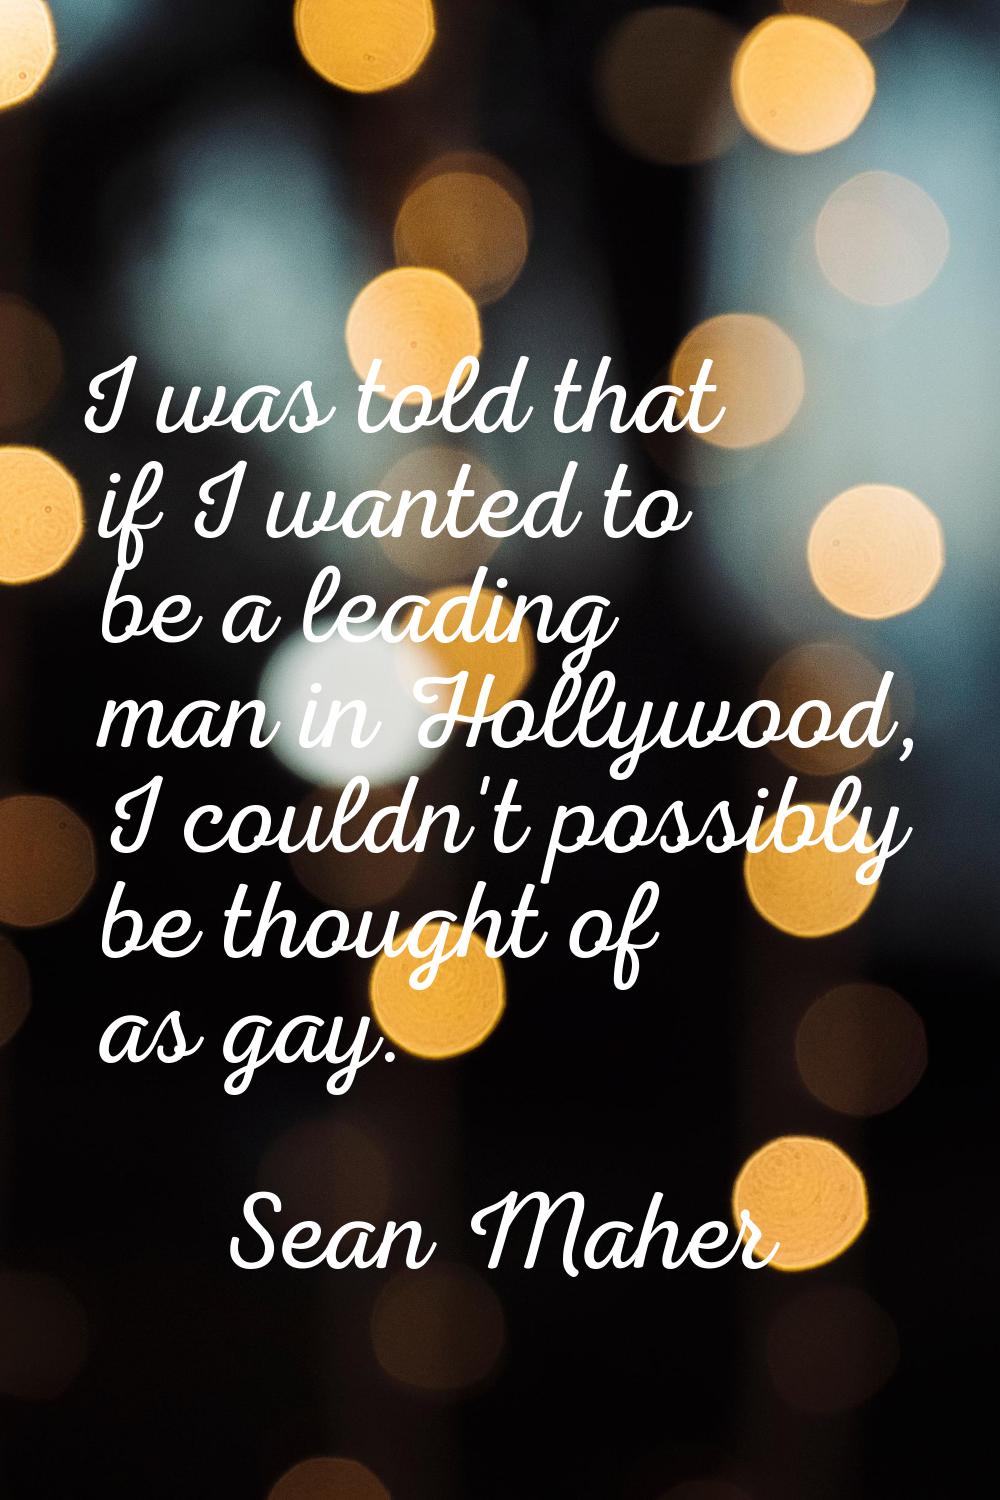 I was told that if I wanted to be a leading man in Hollywood, I couldn't possibly be thought of as 